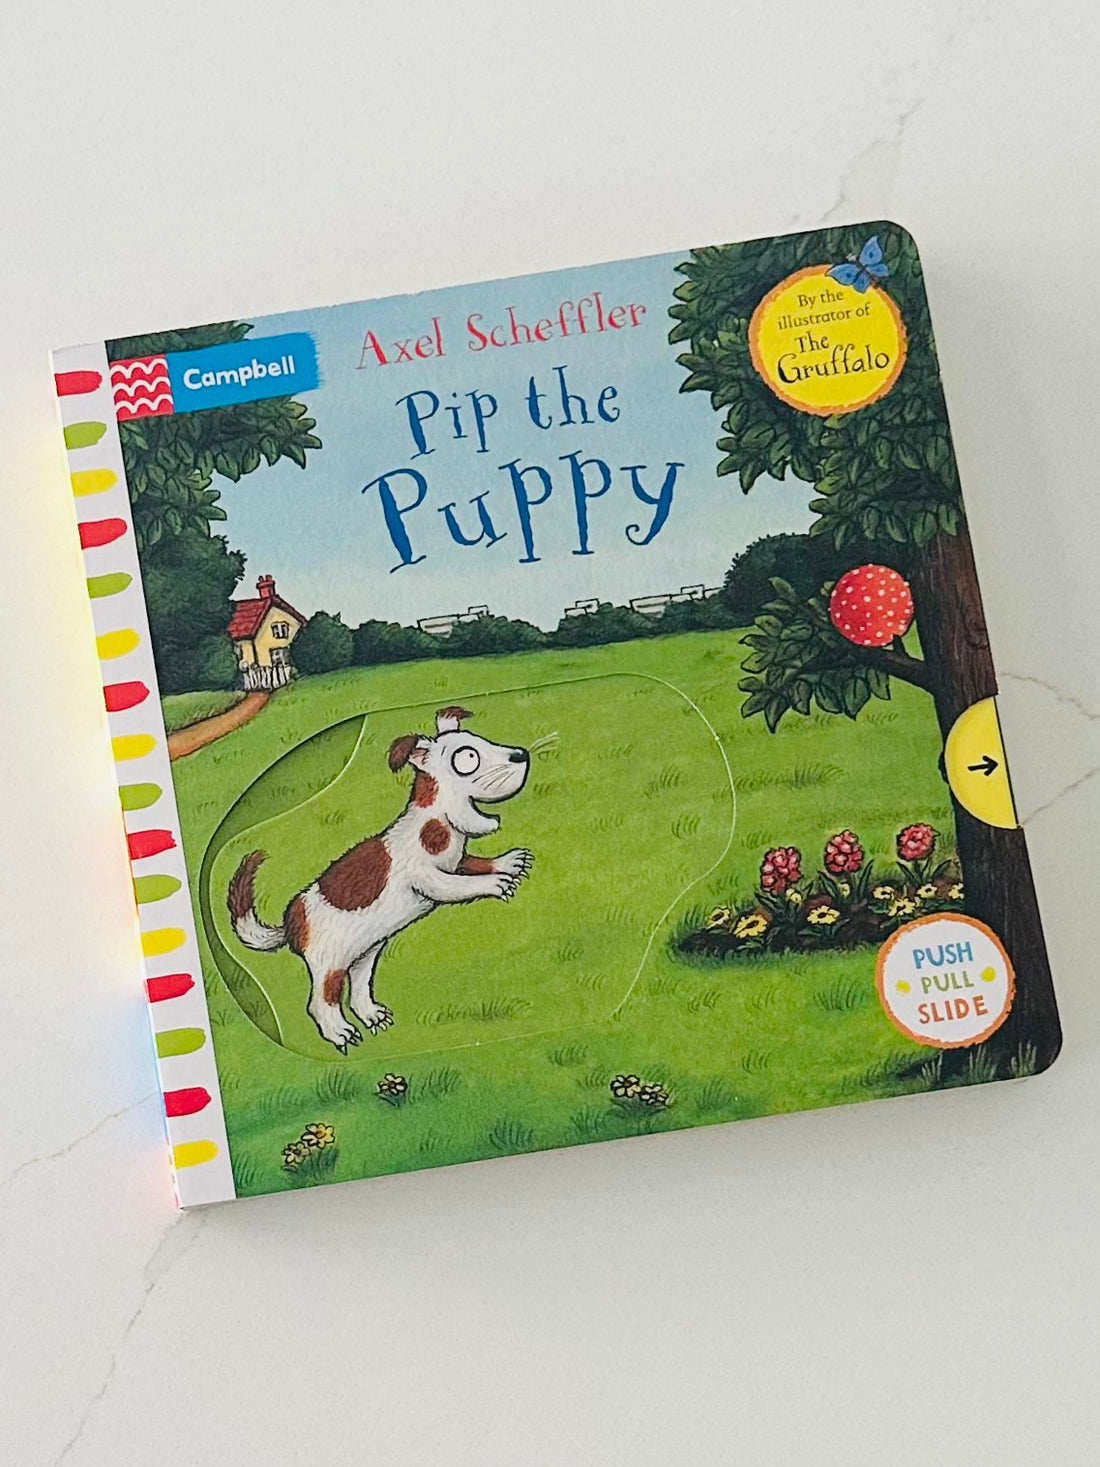 Pip the Puppy: A Push, Pull, Slide Book by Axel Scheffler